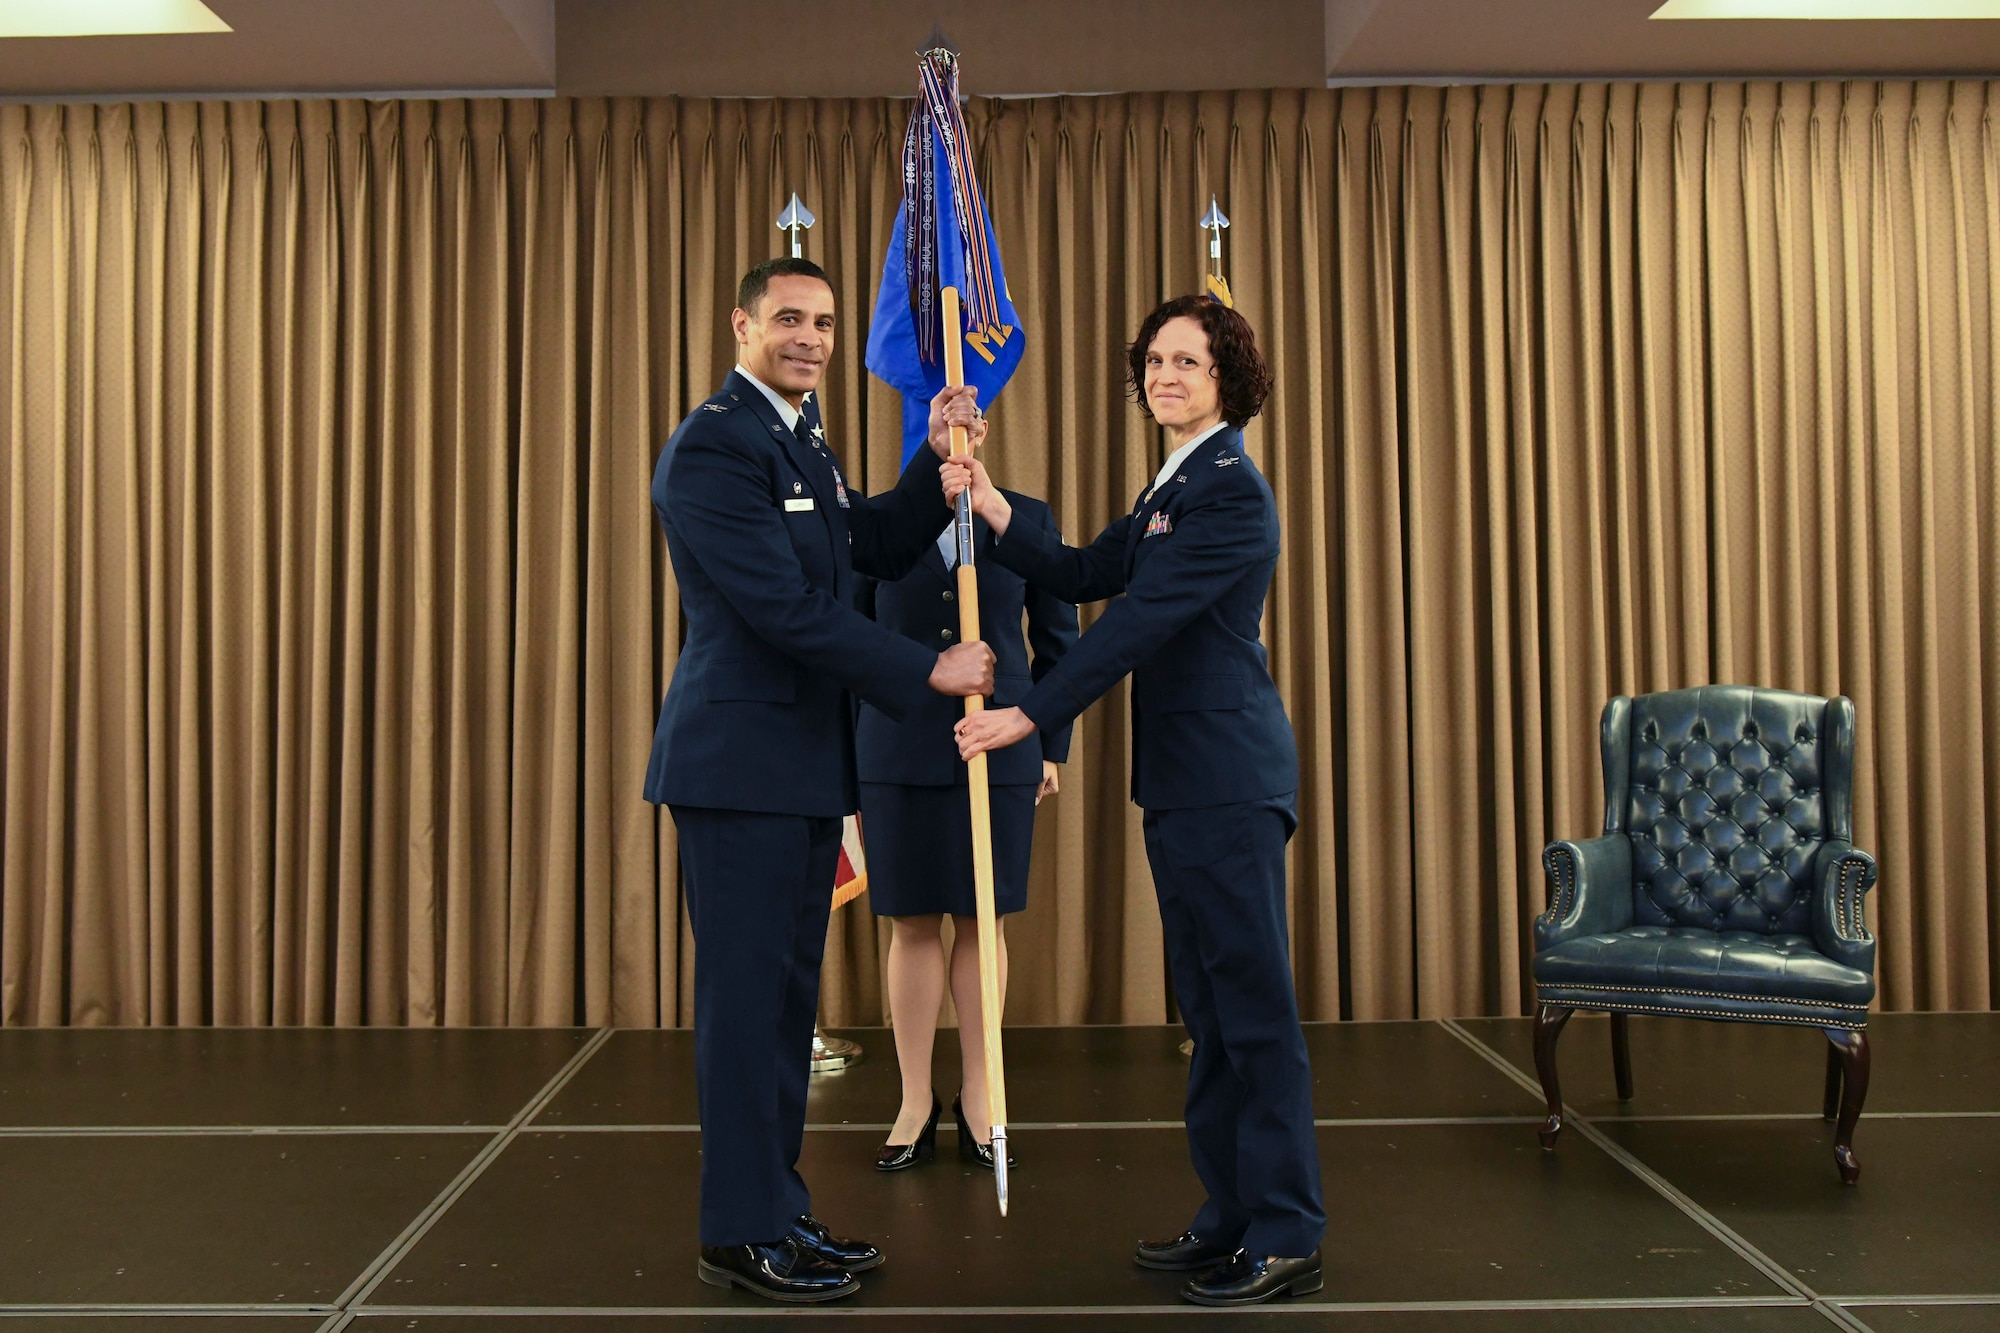 Two people in blue uniforms hold a guidon flag on stage during a ceremony.